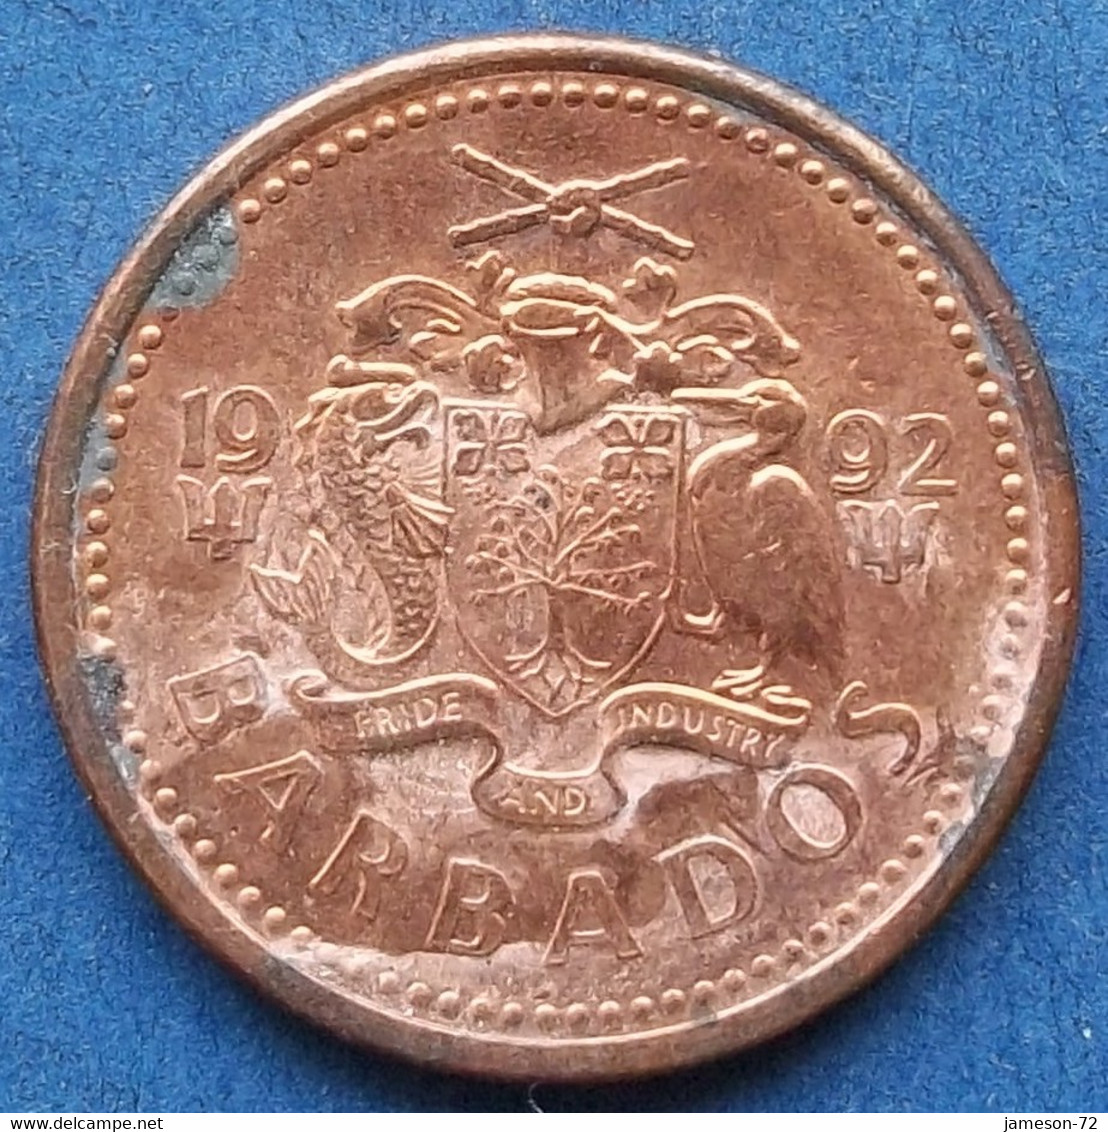 BARBADOS - 1 Cent 1992 "trident" KM# 10a Member Of The Commonwealth, Independent Republic (1966) - Edelweiss Coins - Barbades